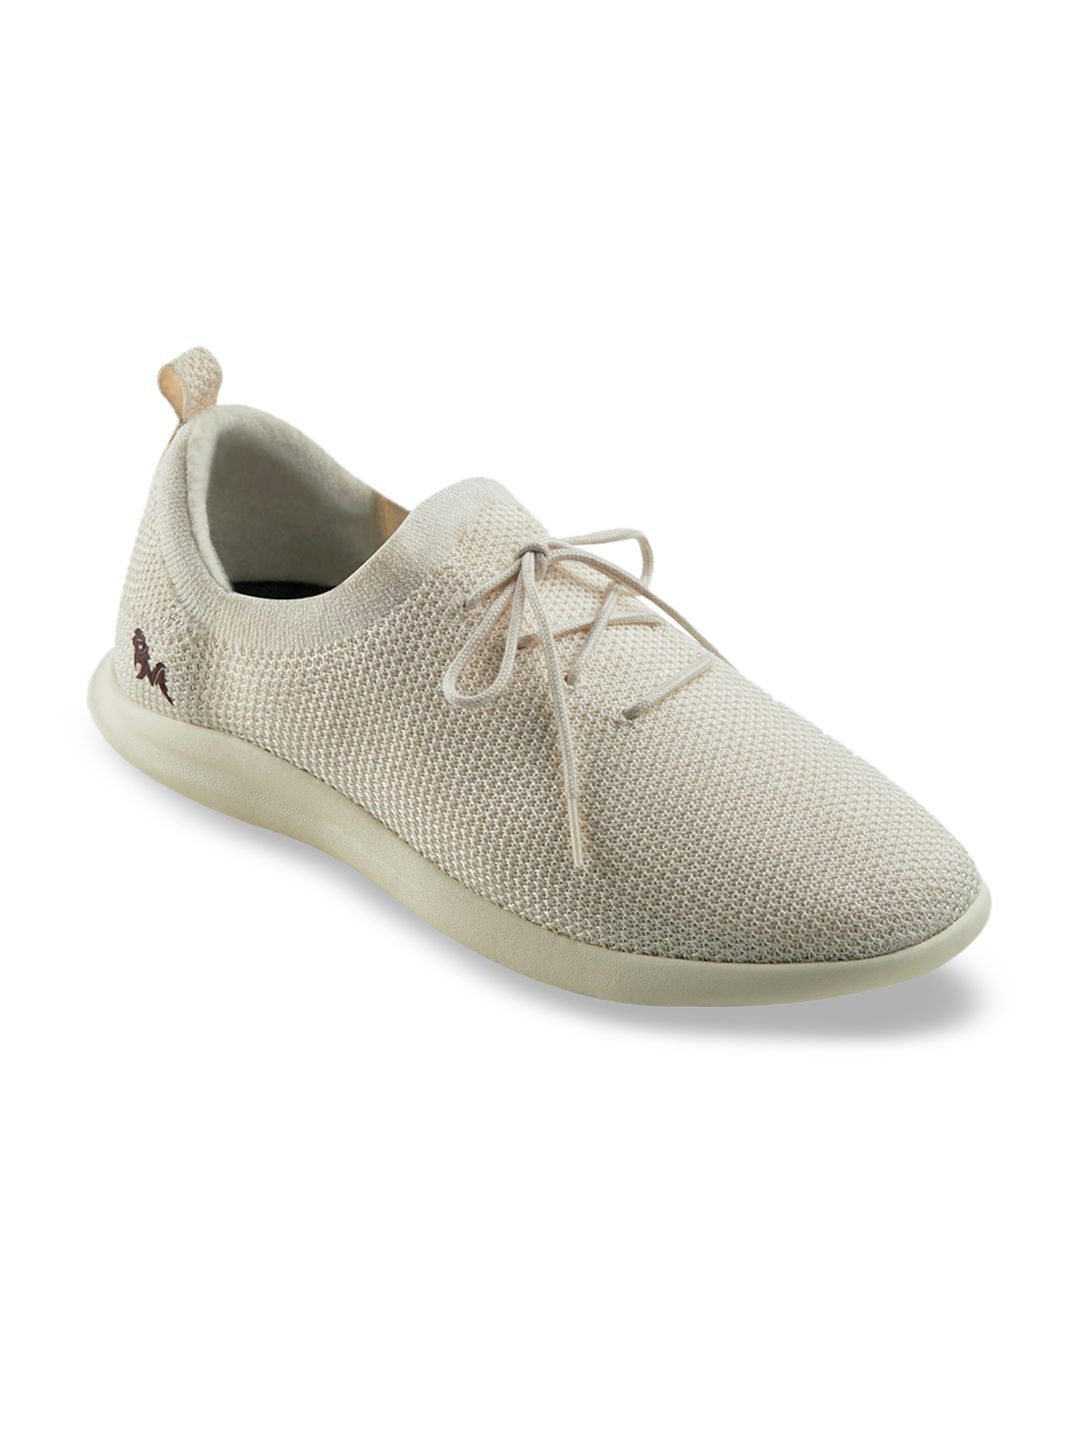 NEEMANS Unisex Ivory Re-Live Knit Sneakers Price in India